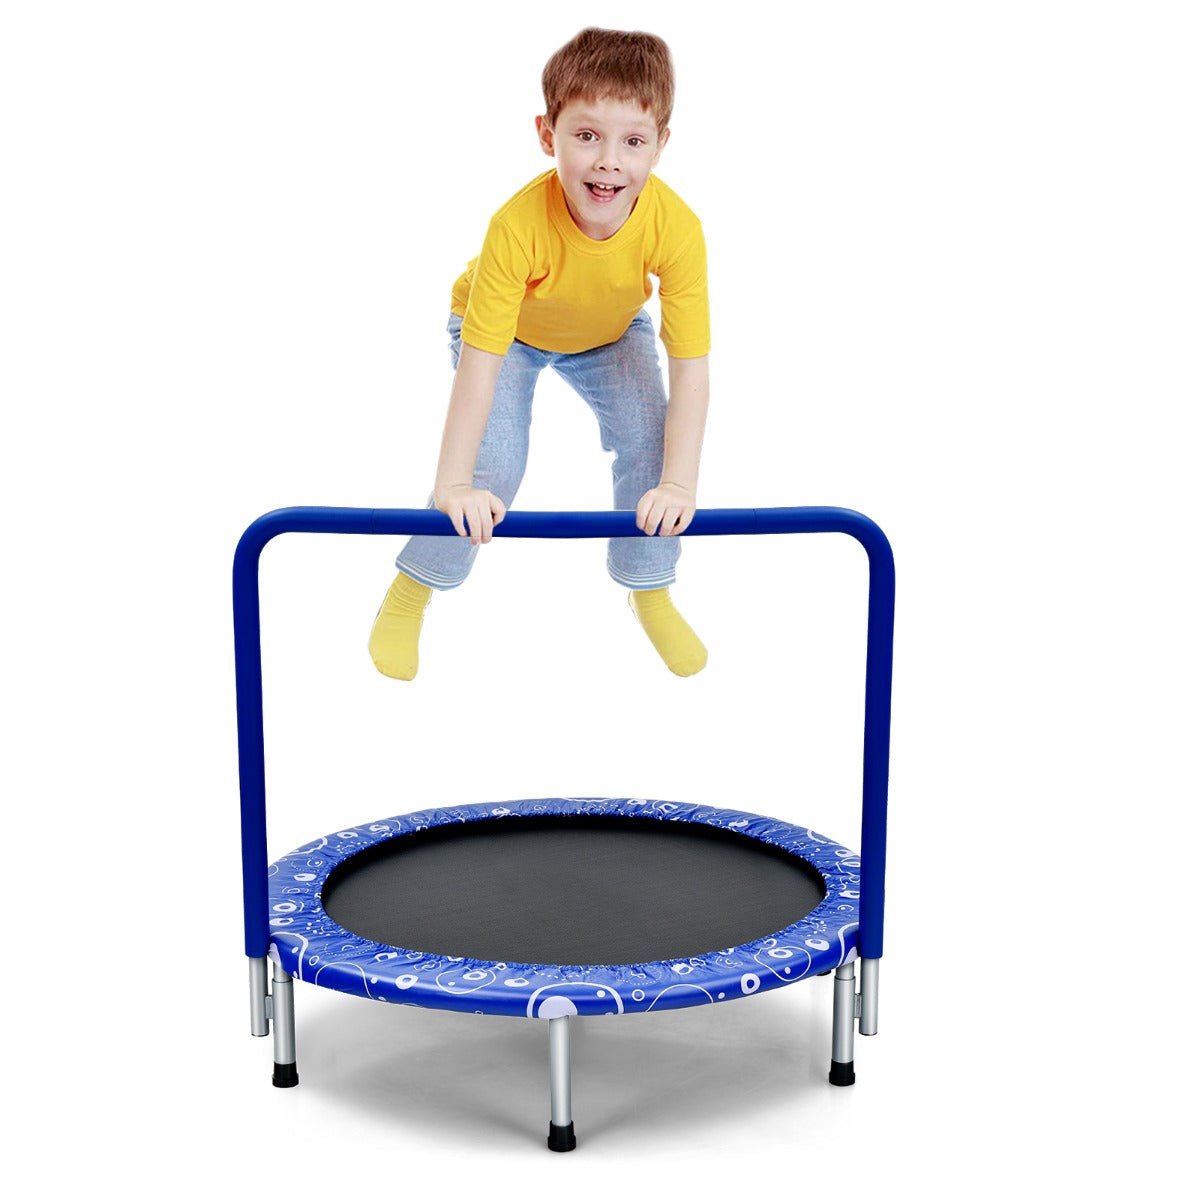 Easy Bouncing: Foldable Kids Trampoline with Handle for Indoor & Outdoor-Blue